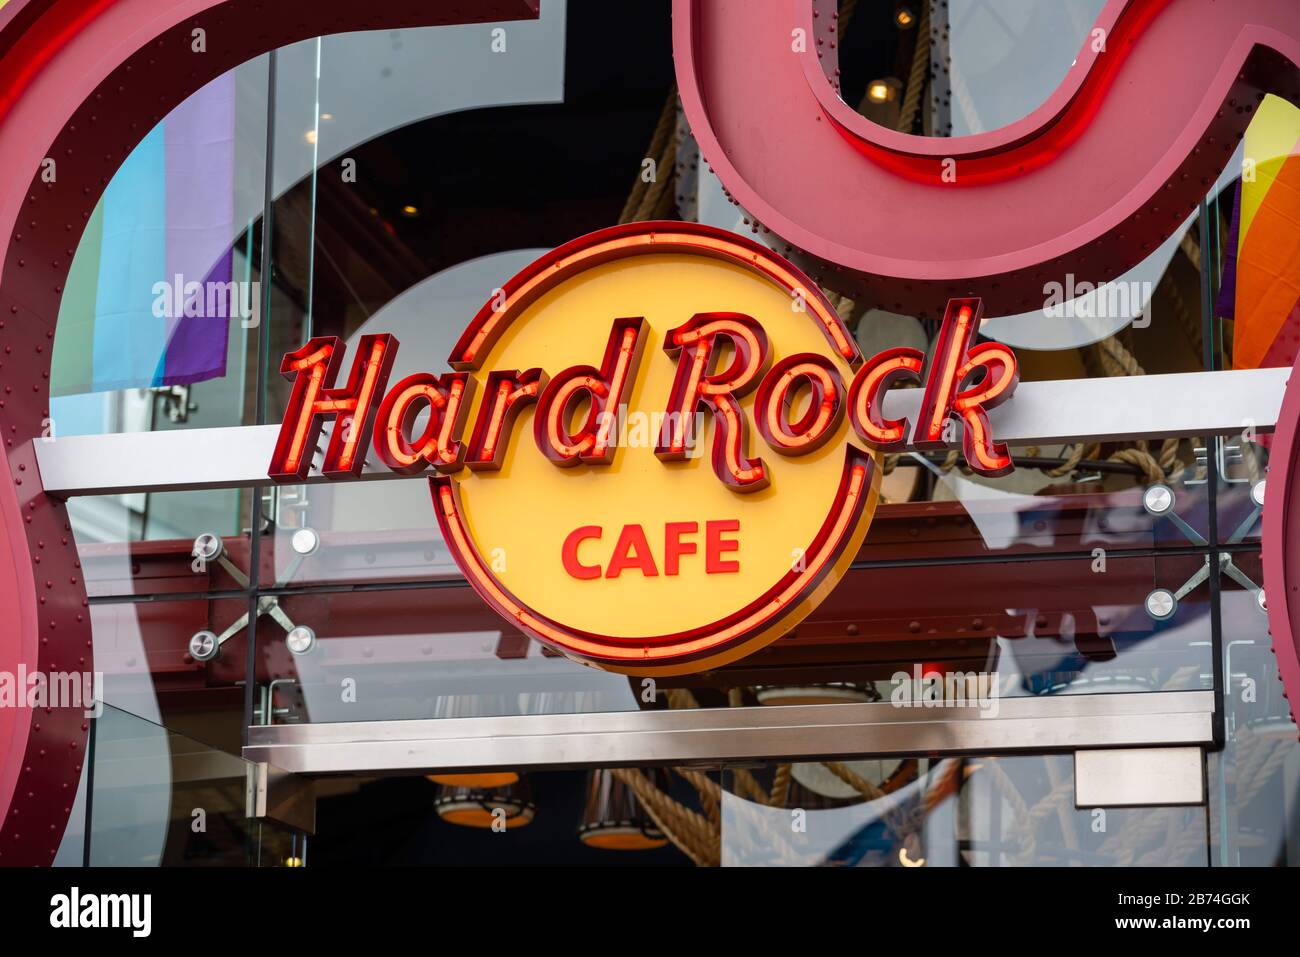 January 22, 2020, San Francisco, United States: American chain of theme restaurants Hard Rock Cafe seen at a restaurant. (Credit Image: © Alex Tai/SOPA Images via ZUMA Wire) Stock Photo